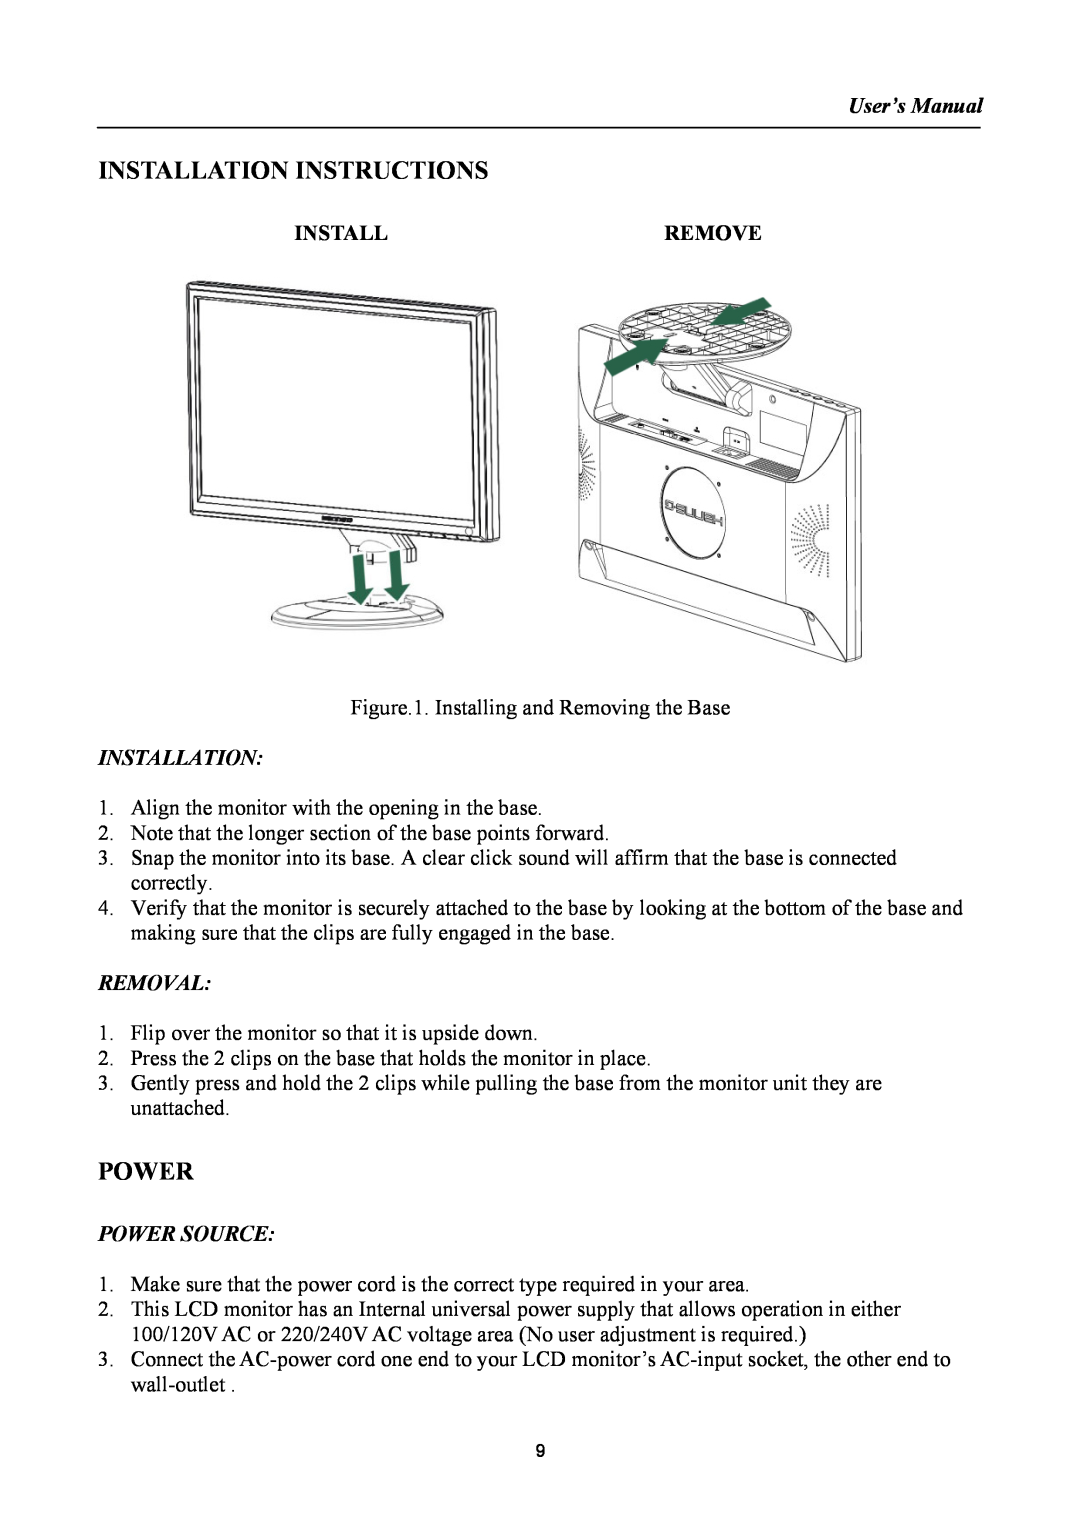 Hanns.G HSG1061, HG221A manual Installation Instructions, User’s Manual, Installremove, Removal, Power Source 